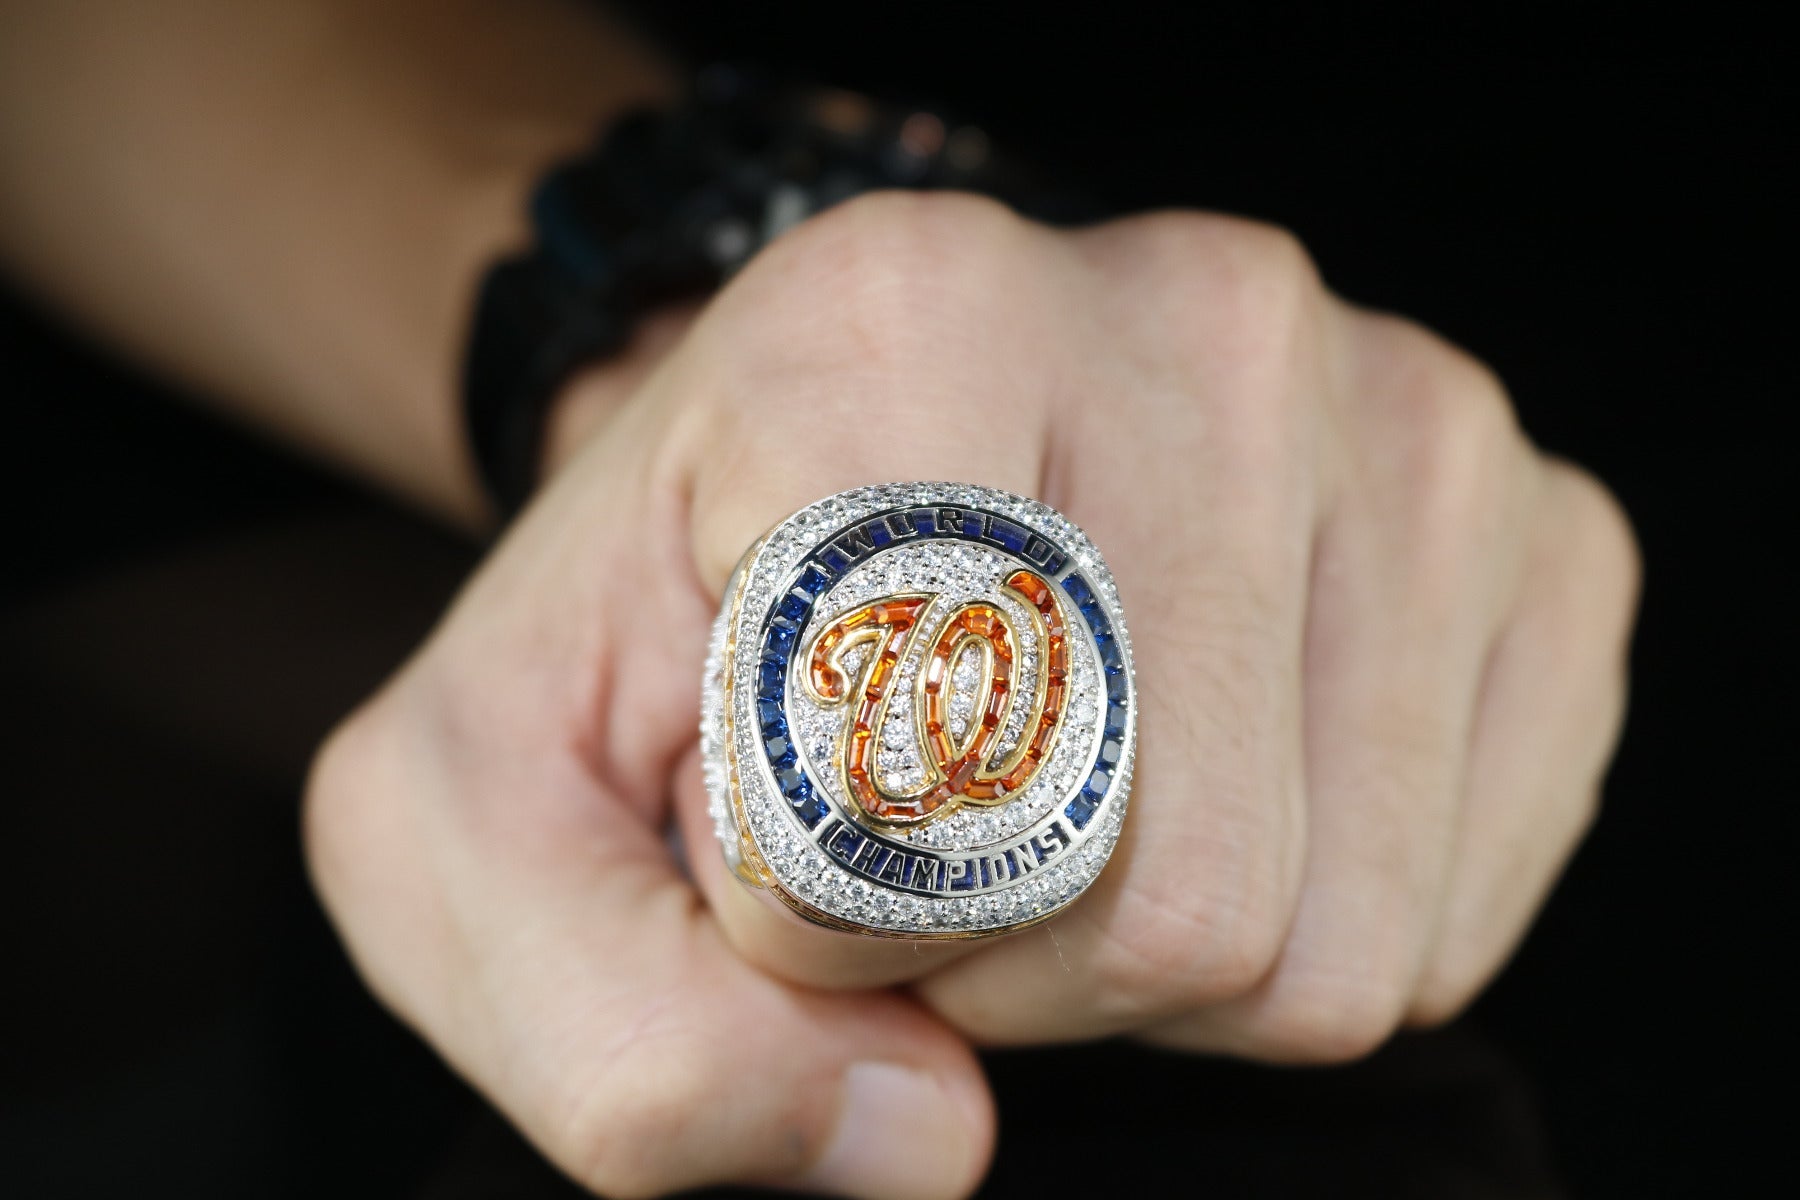 real astros world series ring